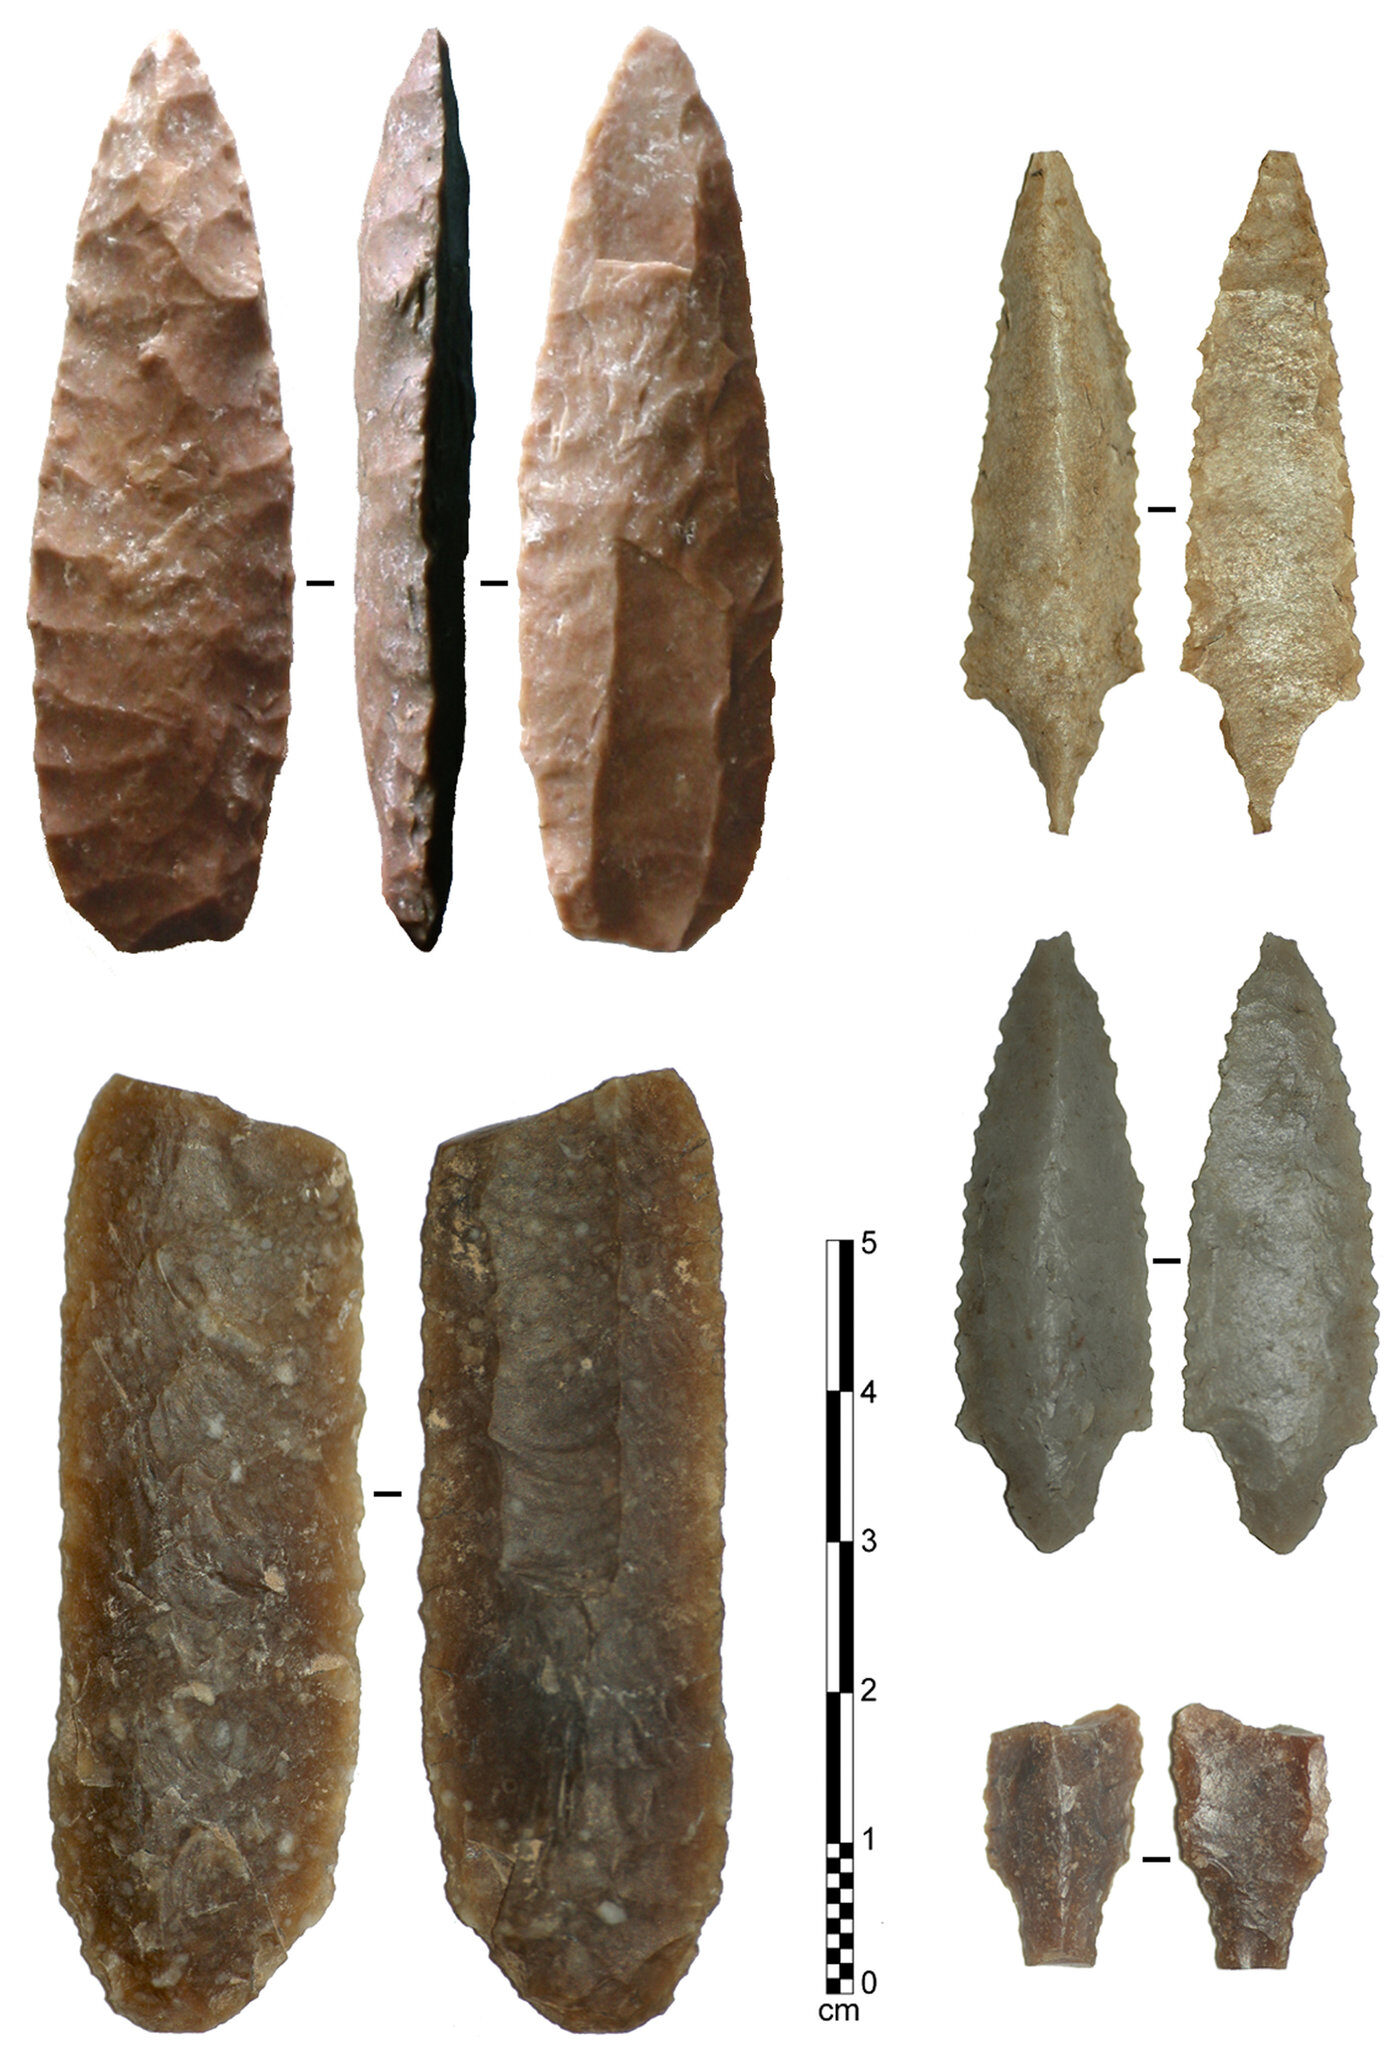 Fluted stone points